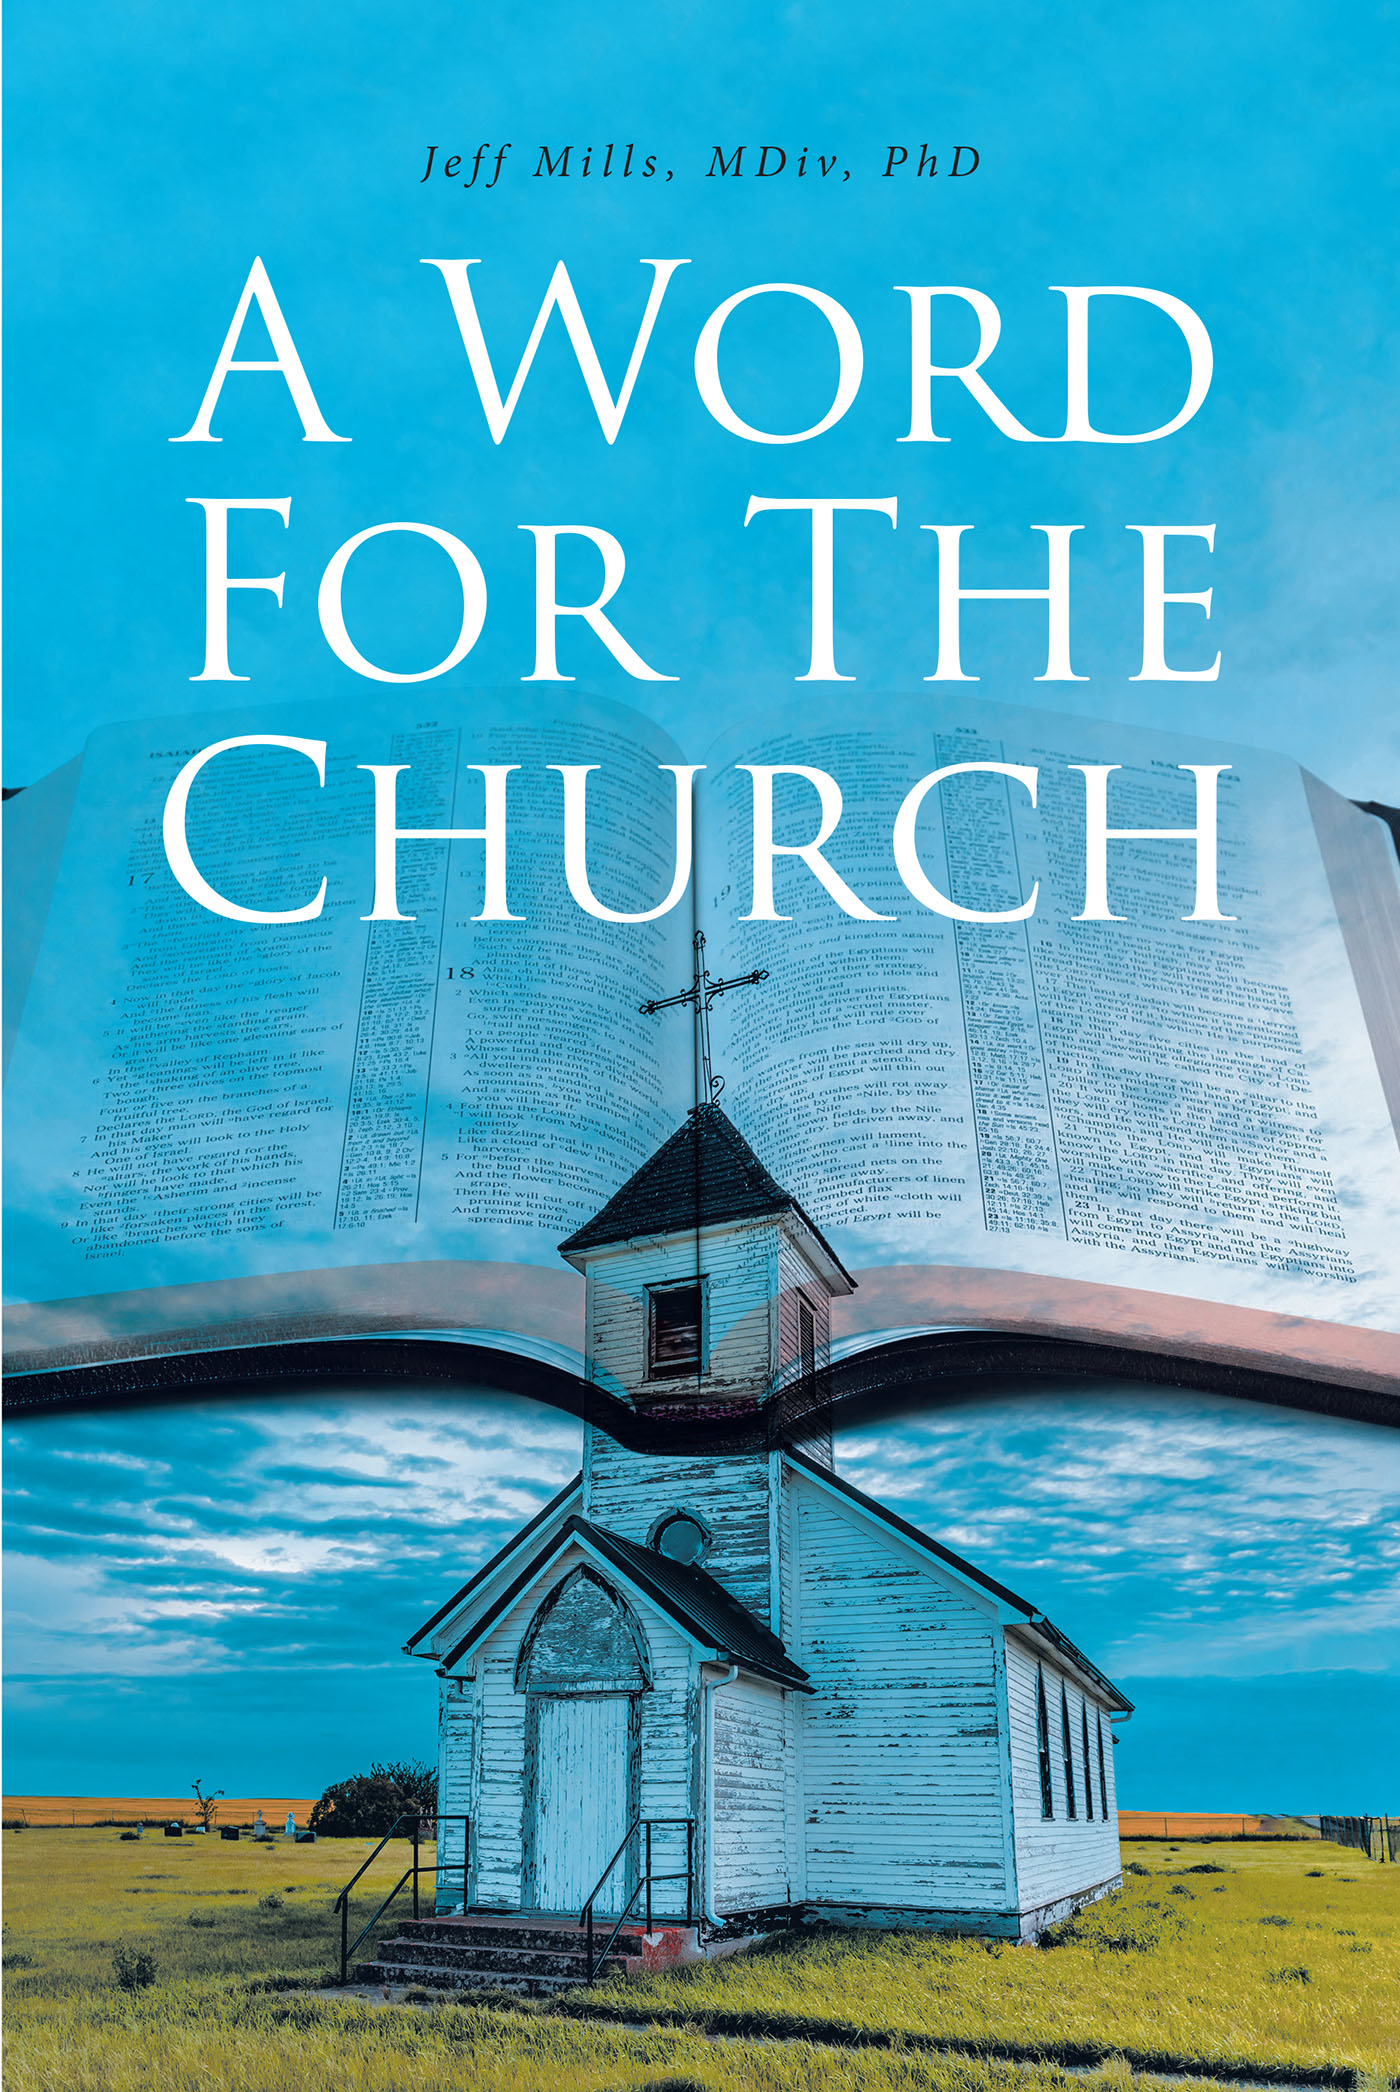 Jeff Mills, MDiv, PhD’s Newly Released “A Word for the Church” is an Uplifting Message of Encouragement for Pastors and Congregants Alike